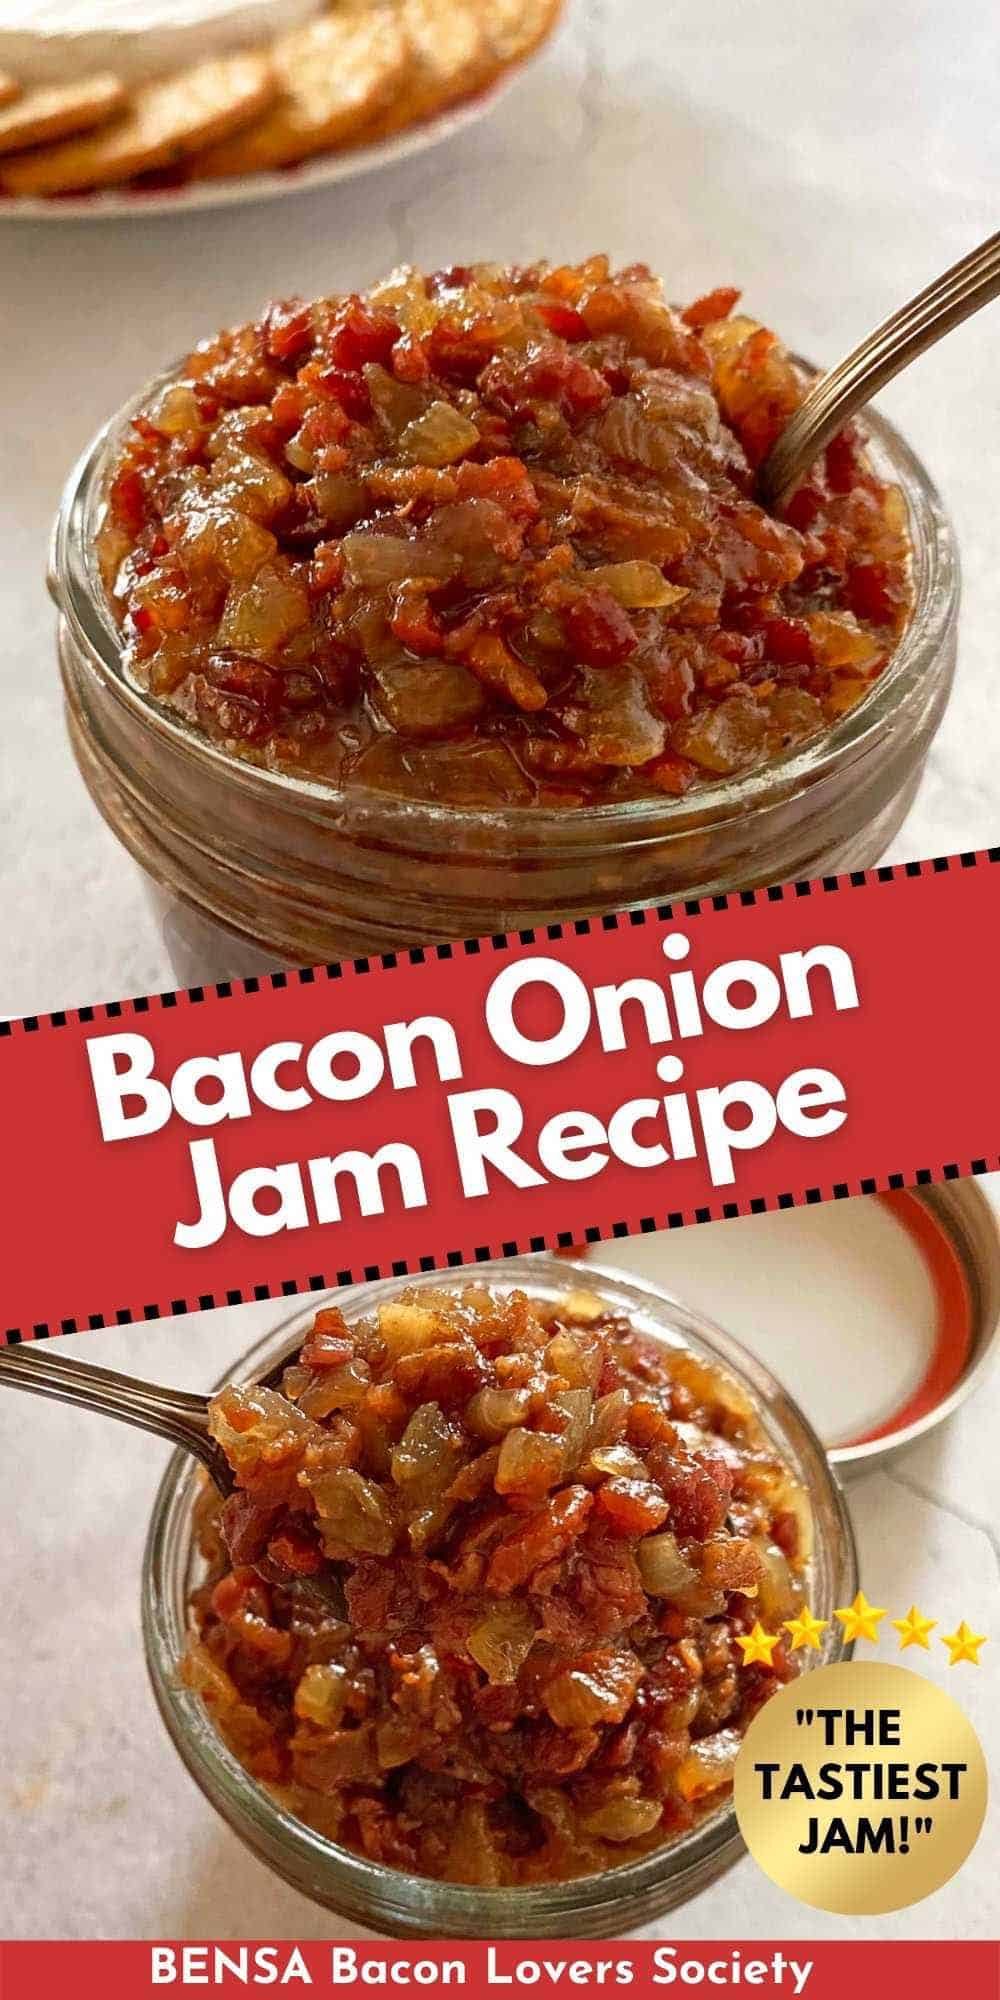 Bacon onion jam in a small Mason jar, shown near a tray with crackers and also from above with a serving spoon.